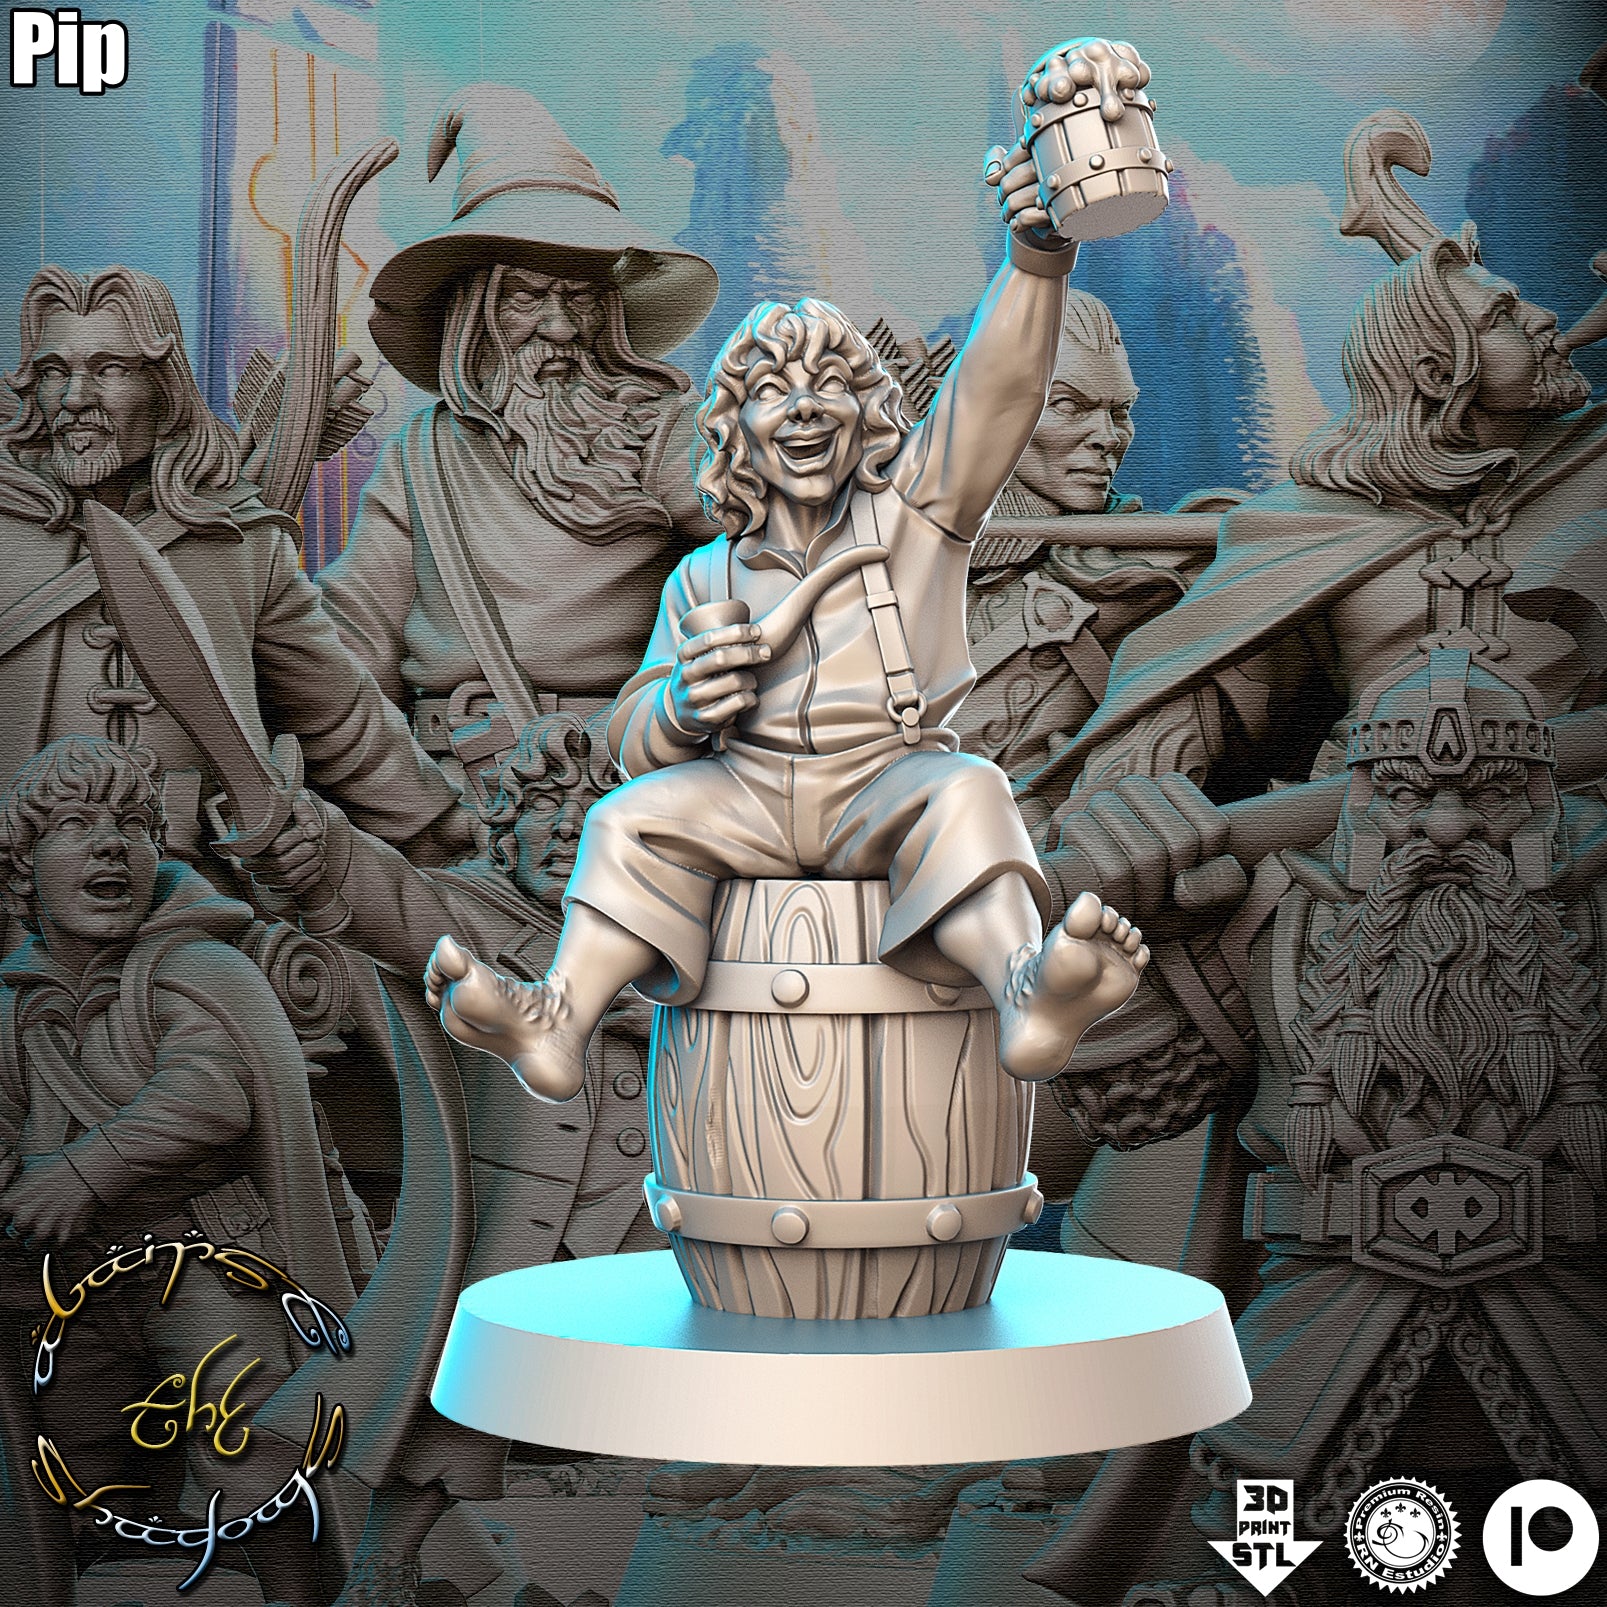 Pip - Against the Shadows - Green Wildling Miniatures